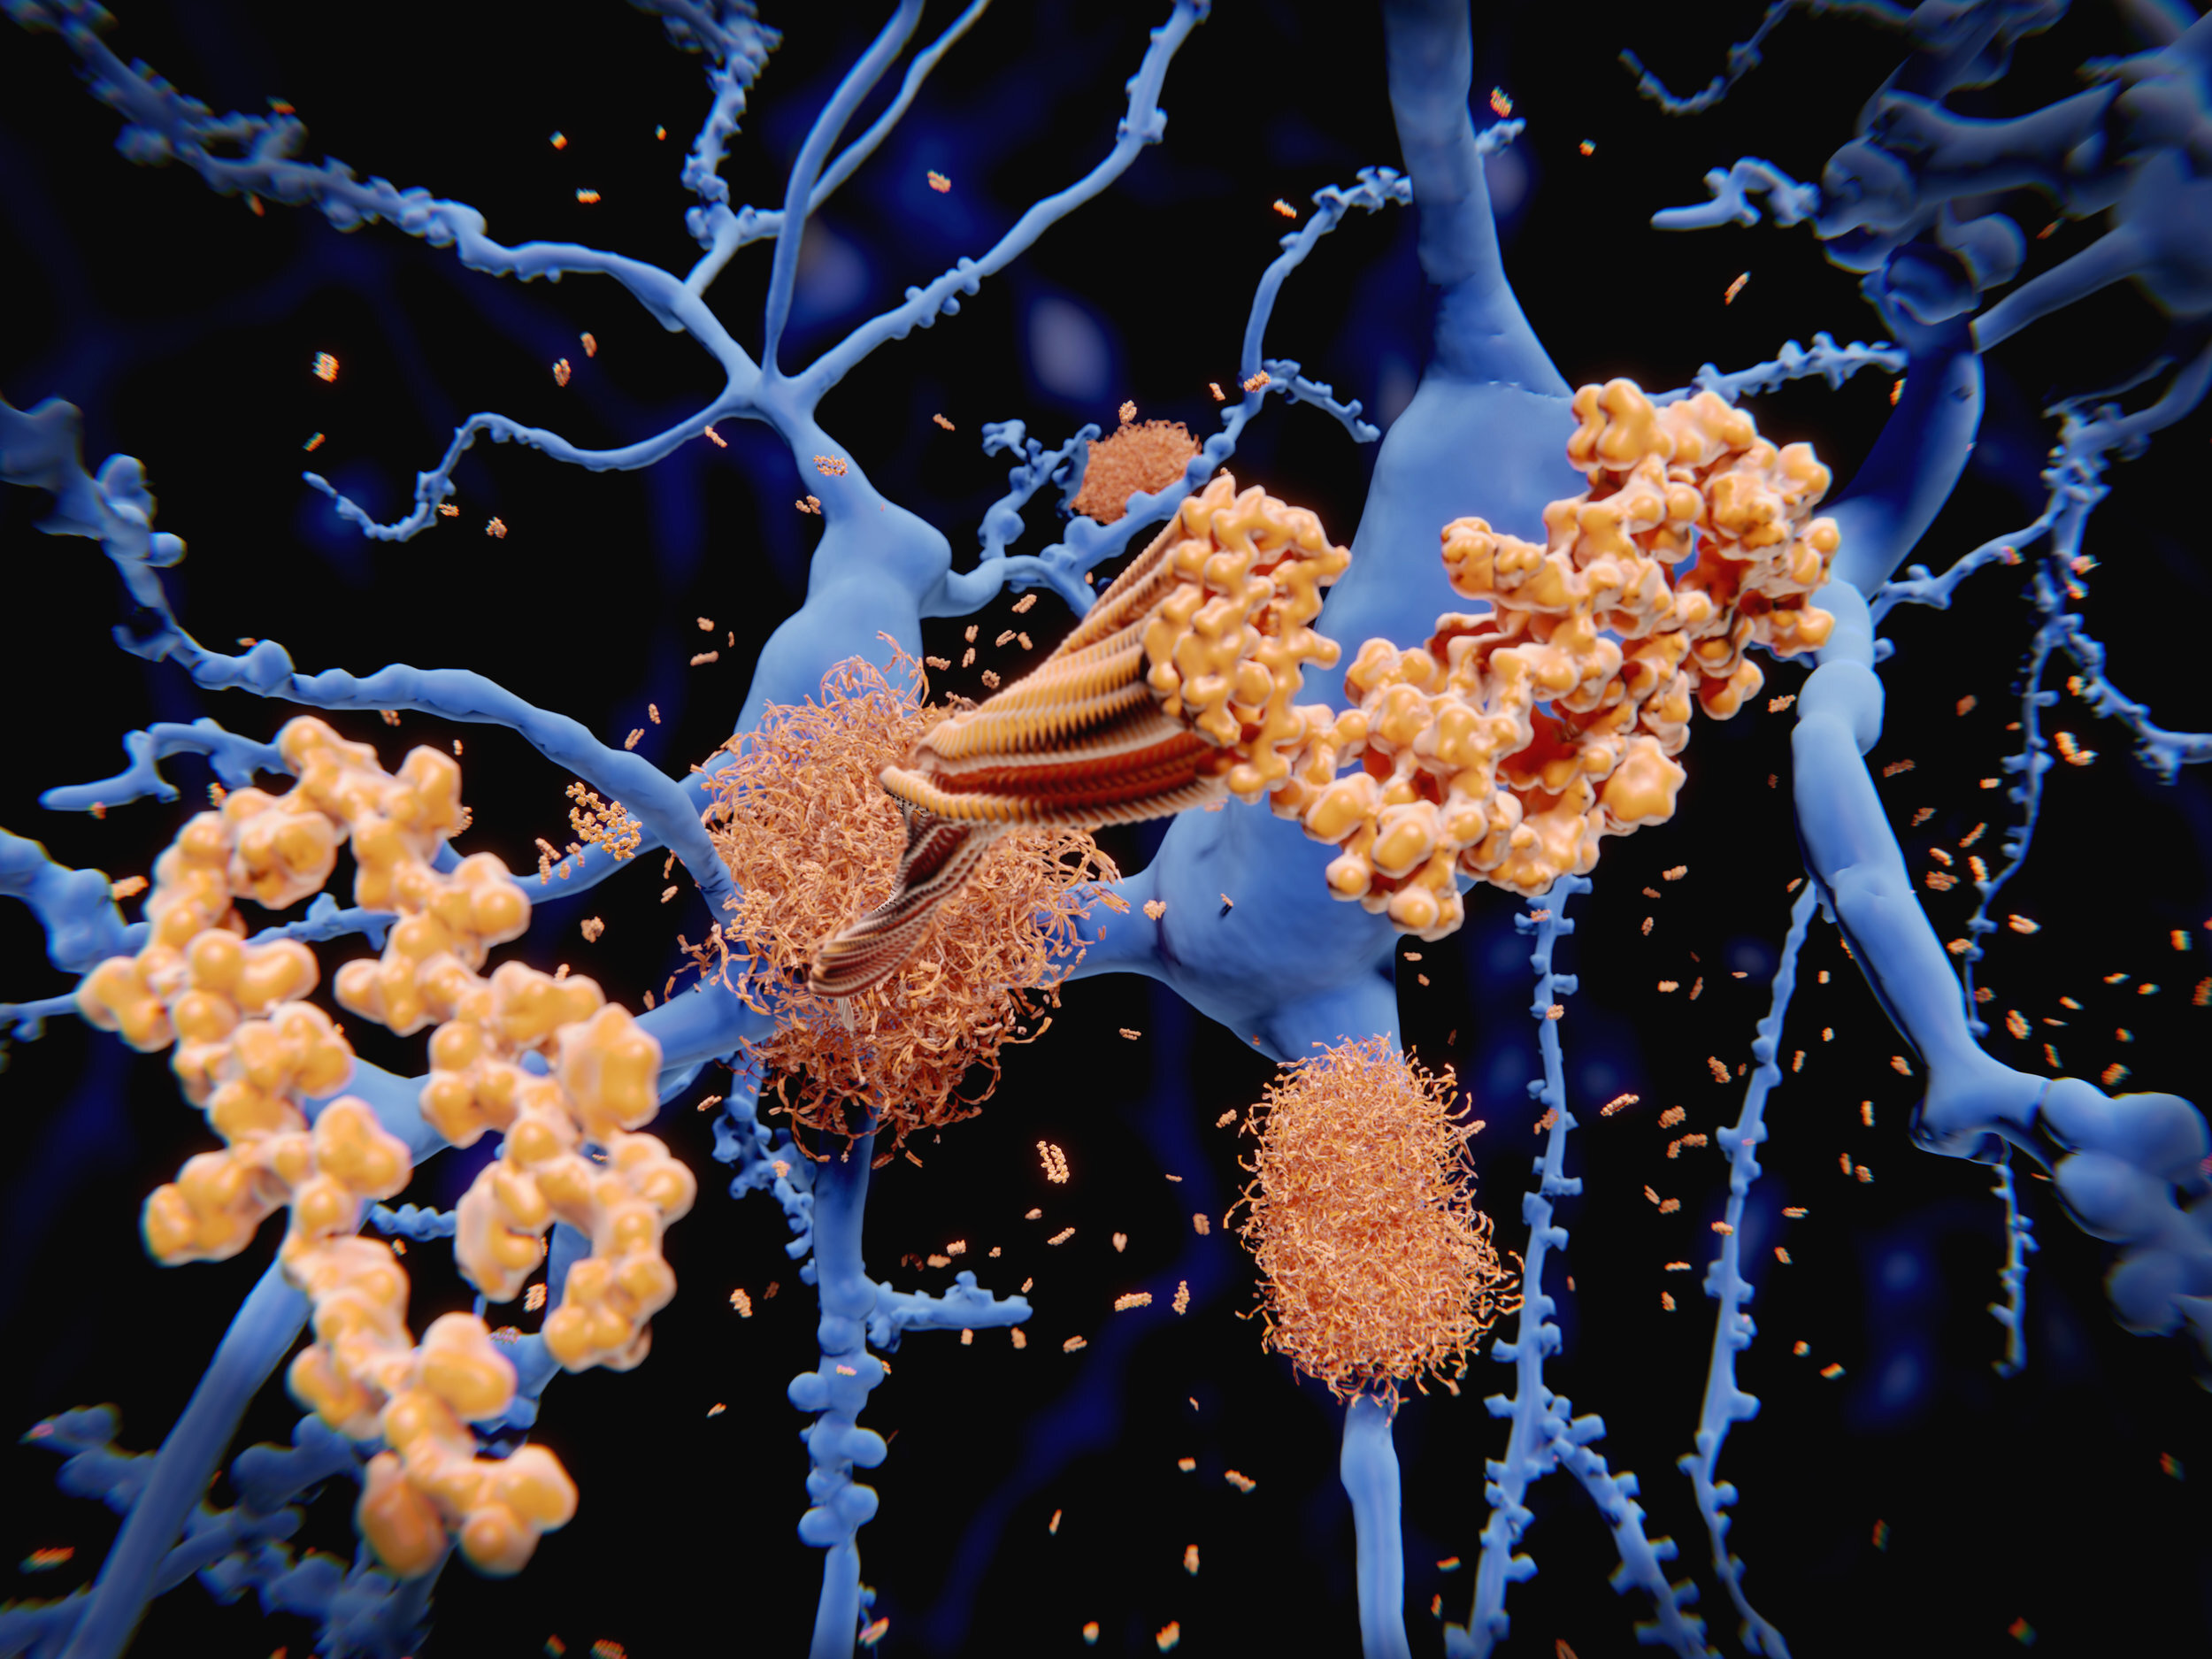 PICTURED: The tau-protein “beta-amyloid” that forms plaques around the neurons in the brain: the principle agent of Alzheimer’s Disease.